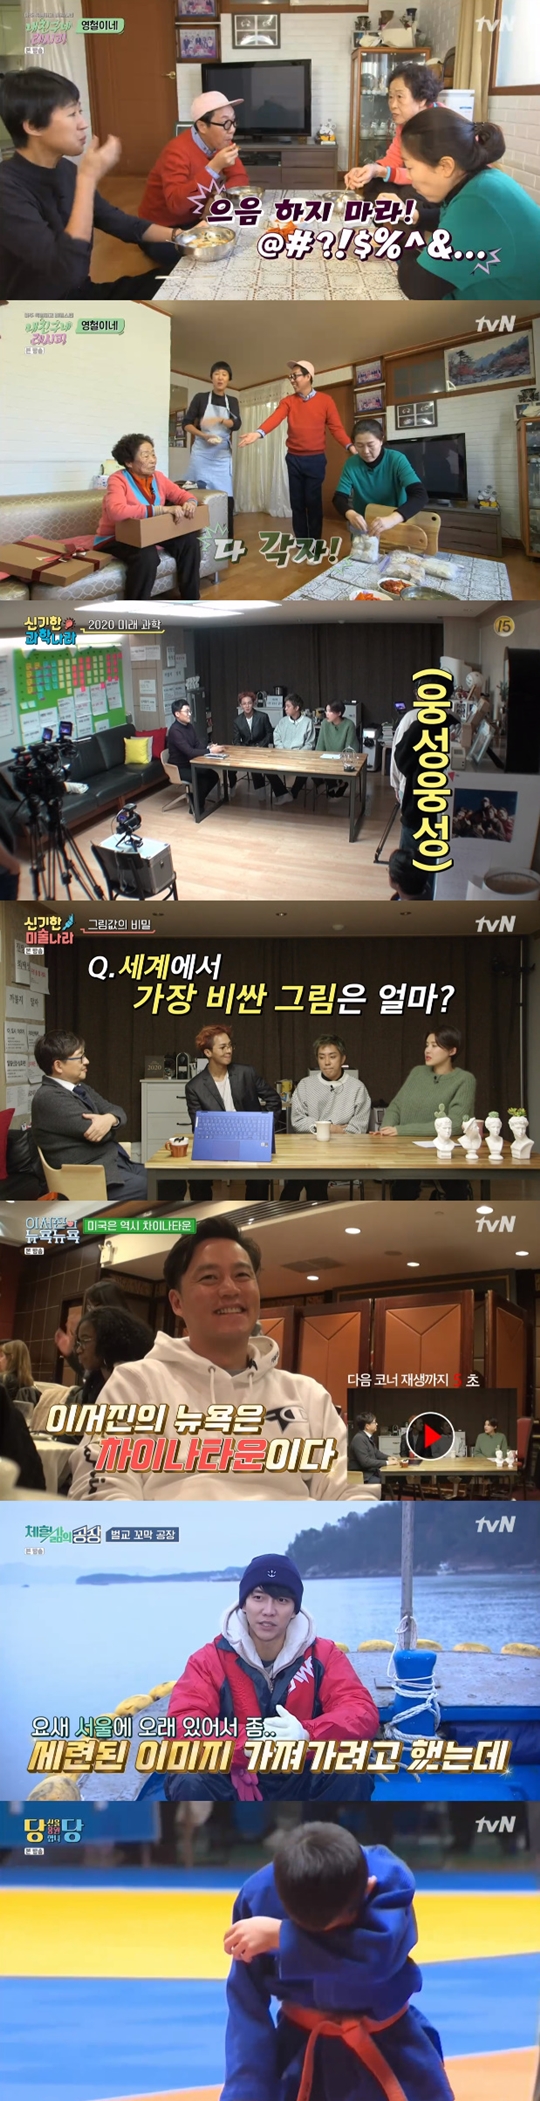 Na Young-Seok PD New entertainment Friday Friday night was full of laughter to emotion.On January 10th TVN Friday Friday Night, six strong corners were released.The first time on the day, Jin-kyeong Hongs Friends Recipe was released.The first guest of Friends Recipe was the 20-year-old Friend Kim Young-chul of Jin-kyeong Hong, and Jin-kyeong Hong headed to Kim Young-chuls main house after a brief talk.Kim Young-chul mom treated Jin-kyeong Hong with urchin egg rice cake soupKim Young-chul mum continued to worry about staff during the meal, as well as embarrassing Jin-kyeong Hong with a continued dialect attack.Kim Young-chul Mom hurriedly prepared a recipe for rice cake soup before finishing the meal, and Kim Young-chul, who saw it, said, The corner is 15 minutes long.My mother is optimized for the corner, he said.In particular, Jin-kyeong Hong could not stop laughing at the appearance of the Kim Young-chul family, who only said their own words.Kim Young-chul showed the buzzword Strengthy Superpower at the end of the corner, but both mother and sister focused on their work and made the scene into a laughing sea.Then, New Science Country and New Art Country starring Eun Ji-won, Song Min-ho and Jang Do-yeon were unfolded.The three talked about future science in The Wonderful Science Country.At this time, Song Min-ho surprised everyone by using the term special point saying Do not you want to laugh?On the other hand, Eun Ji-won said, I thought I was talking about the gas range after hearing the microwave explanation.In the New Art Country corner, the three people asked storm questions about what they usually wondered.Lee Seo-jin hosted the Lee Seo-jins New York New York corner to match the Old New Yorker.Lee Seo-jin visited Chinatown on his arrival in New York, looking for dim sum; Lee Seo-jin, heading to Chinatown the next day.Lee Seo-jin told the production team, I do not have a place that I failed to go, Its all delicious because Im coming to Chinatown., What hamburger is a stimulating food, he laughed with confidence.Lee Seung-gi, who met Na Young-Seok PD for a long time, took the Factory of Experience Life corner and headed for the farm.Lee Seung-gi, who worked at an eight-hour cockpit factory, immediately changed into a work suit.Lee Seung-gi, with a sloppy laugh, said: I was going to take a sophisticated image and why is all this familiar?Lee Seung-gi also showed off his unique chemistry with the factory bosses.Lee Seung-gi was well pushed by many bosses and said, I will show you philosophy, not just labor in the second episode.Friday Friday Night not only gave a laugh but also an impression: a picture of young judo players in the You Cheerful Hall corner.Park Ji-yoon was impressed by the game of the second and third grade friends in elementary school.Park Ji-yoon, who is proud of his extraordinary desire to compete despite his small body, said, How do children cope with that tension?, But he stayed to the end.I did well, he said.Park So-hee